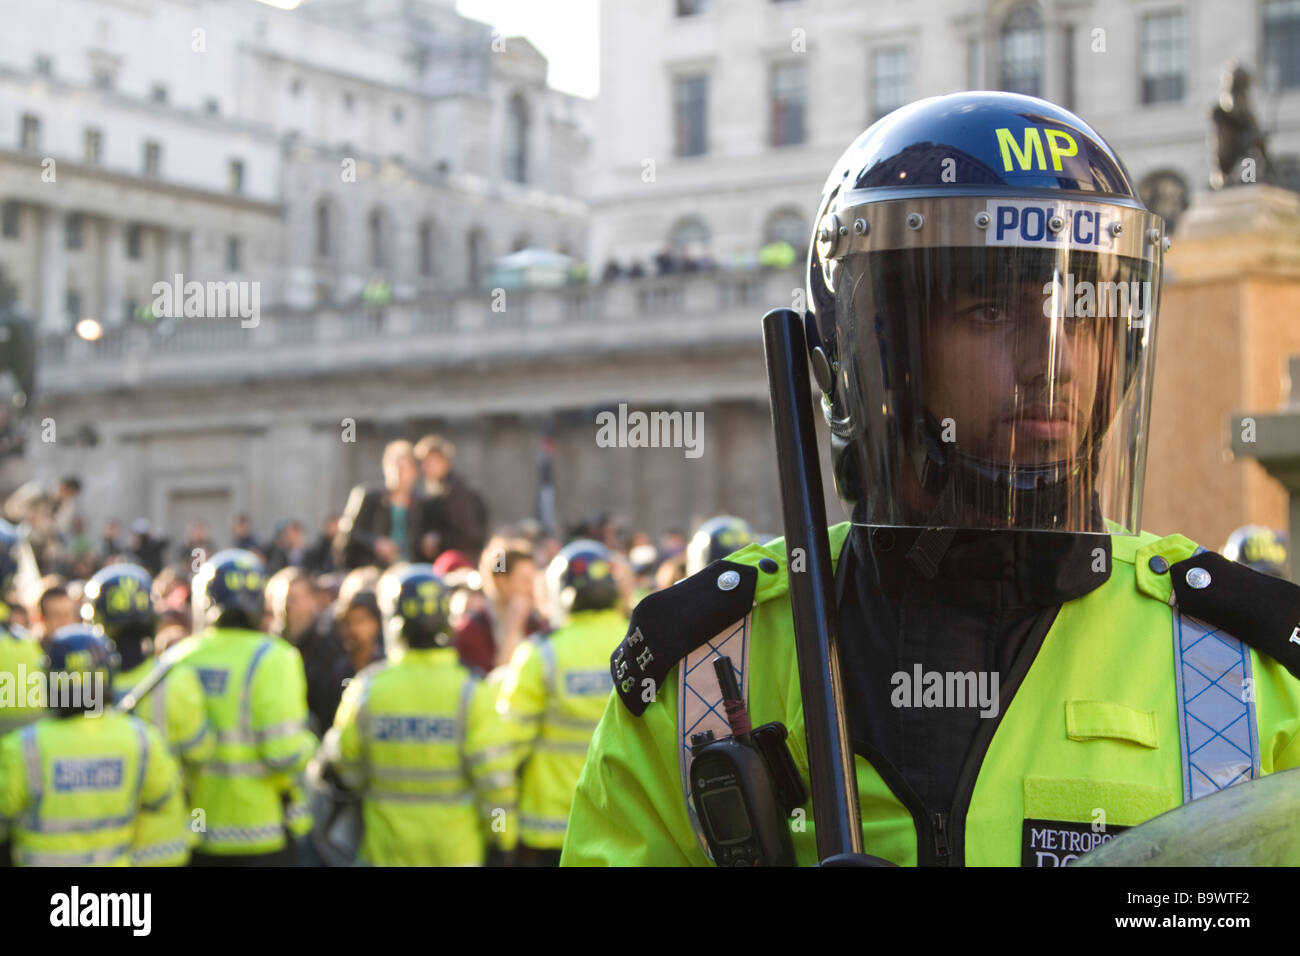 Riot Police at G20 summit protests outside Bank of England City of London UK Stock Photo